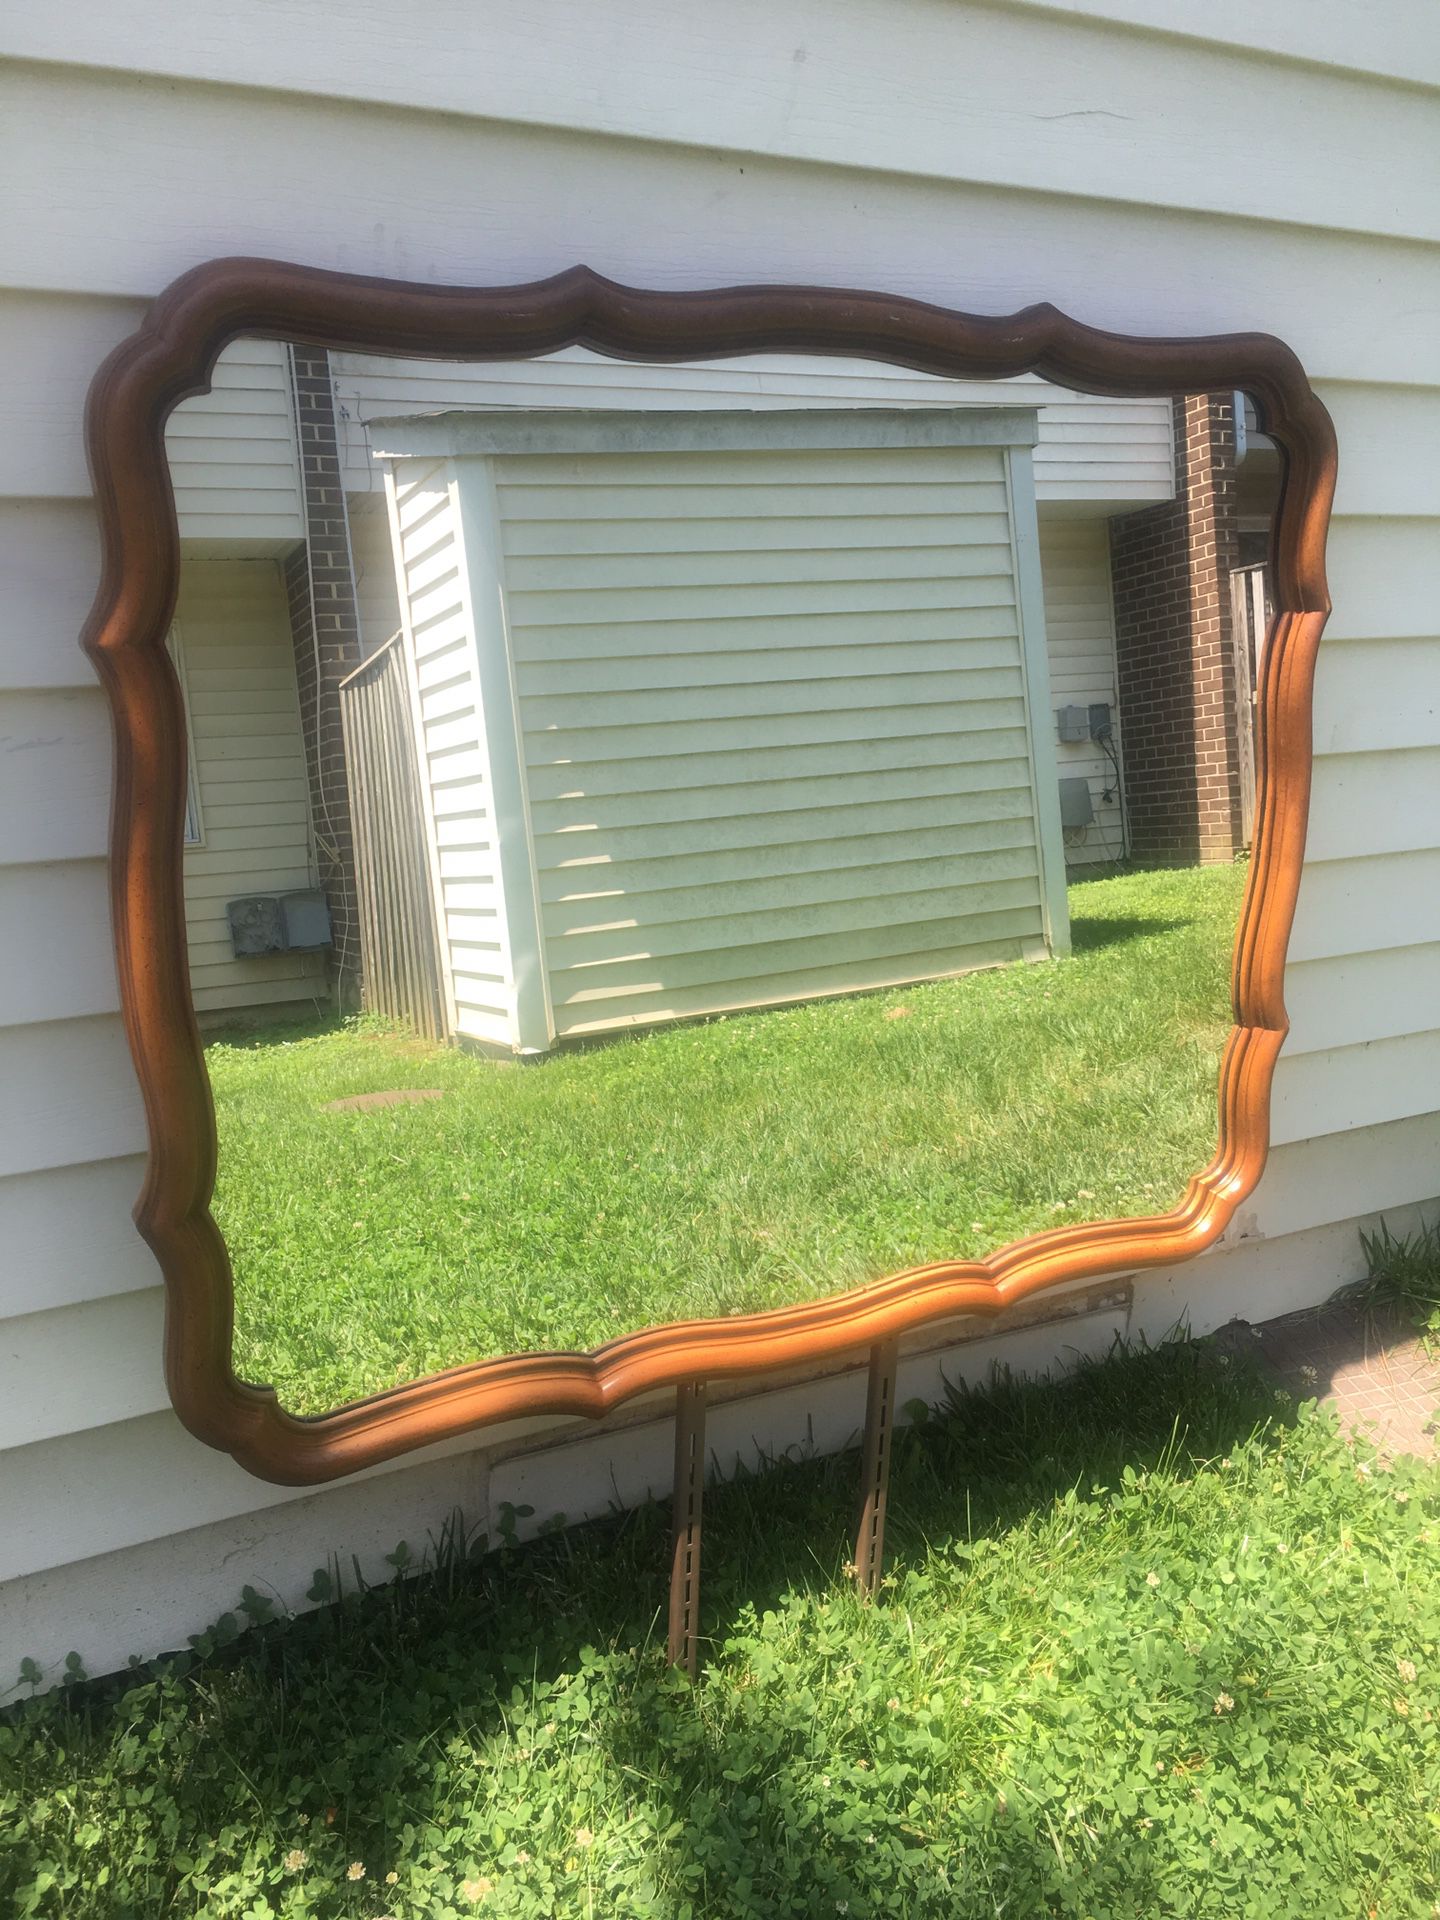 Dresser mirror / can be used w or without dresser. Hardware removable